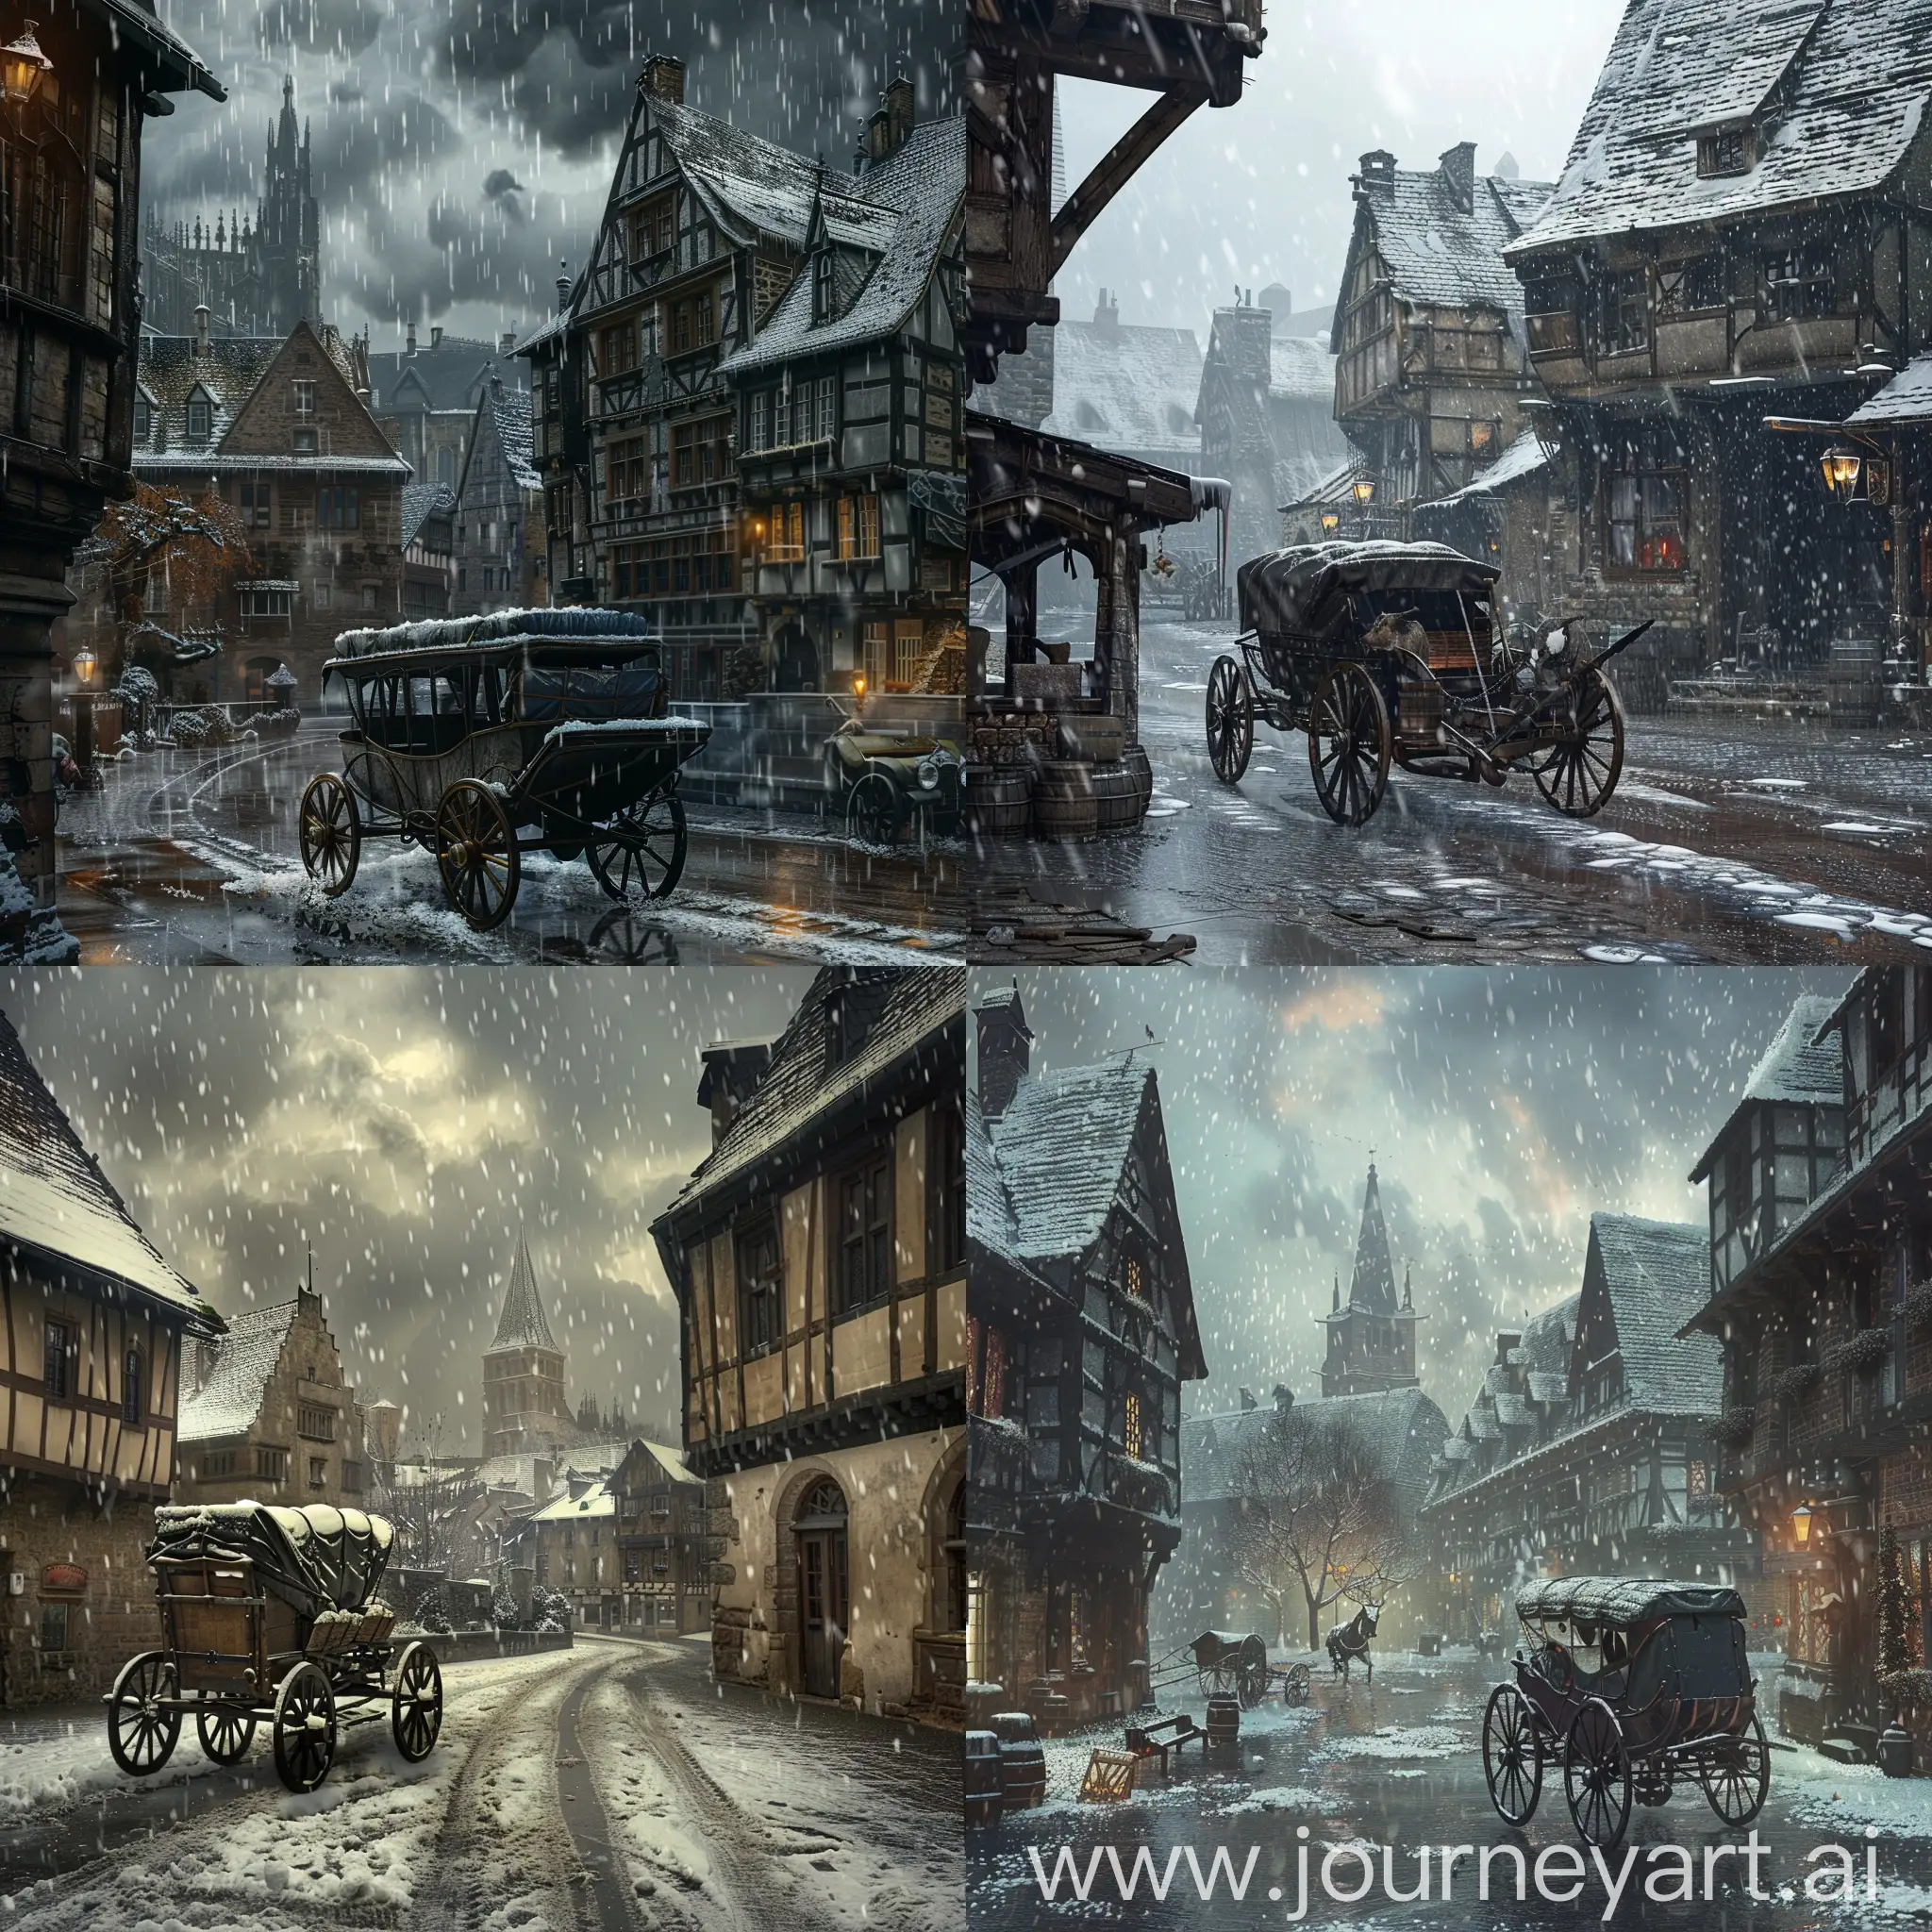 Medieval-European-Carriage-Scene-in-Snowy-Town-with-Rain-and-Sadness